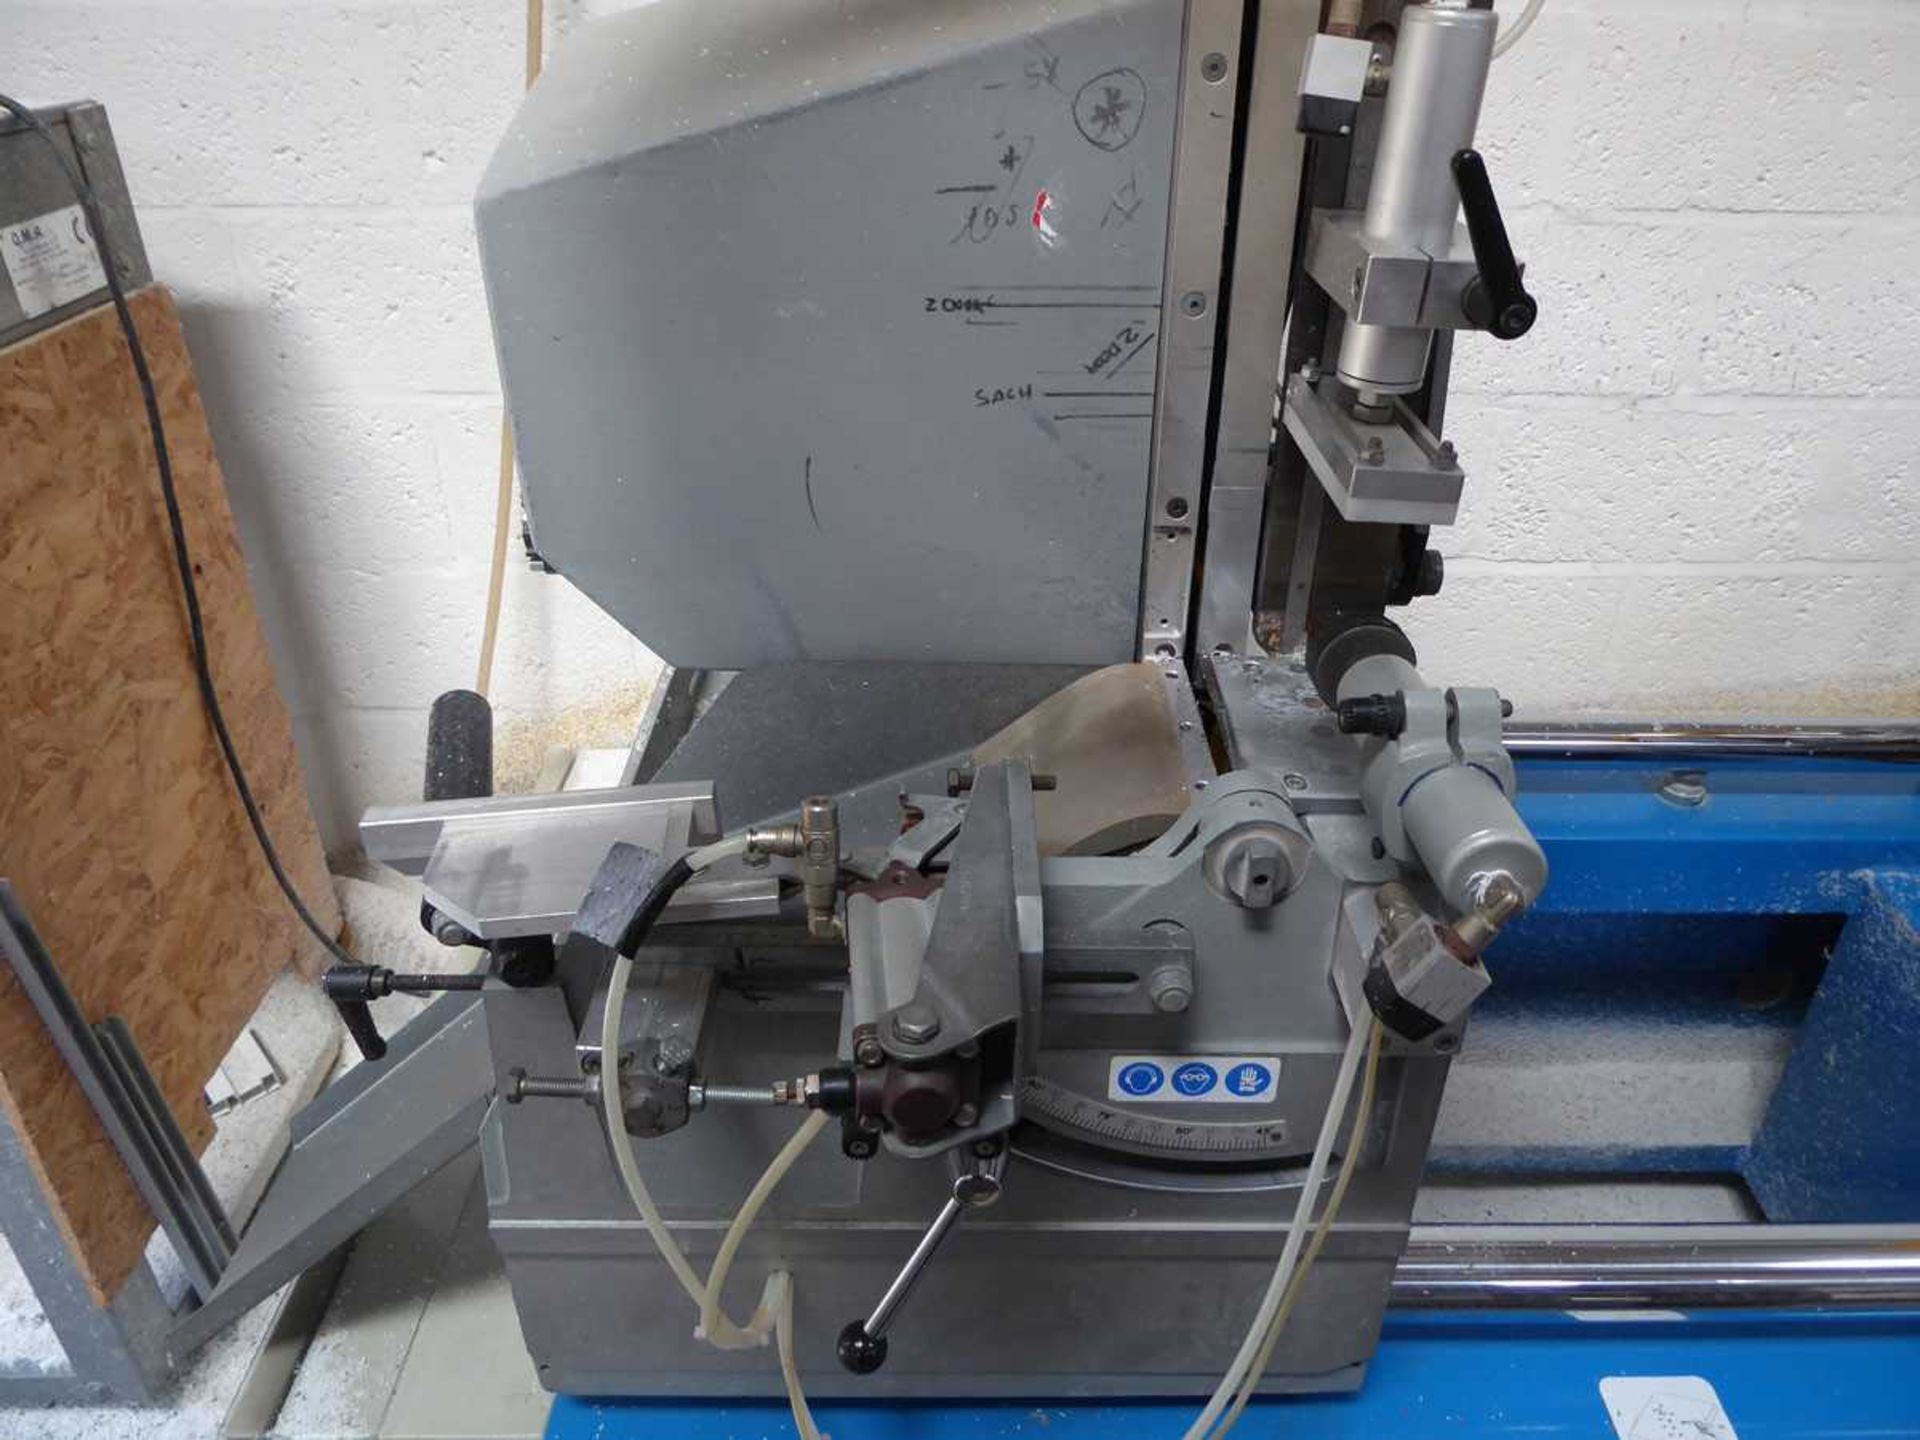 Pertici Univer 500D2K double head PVCu saw, year approx 2004 - Image 3 of 10